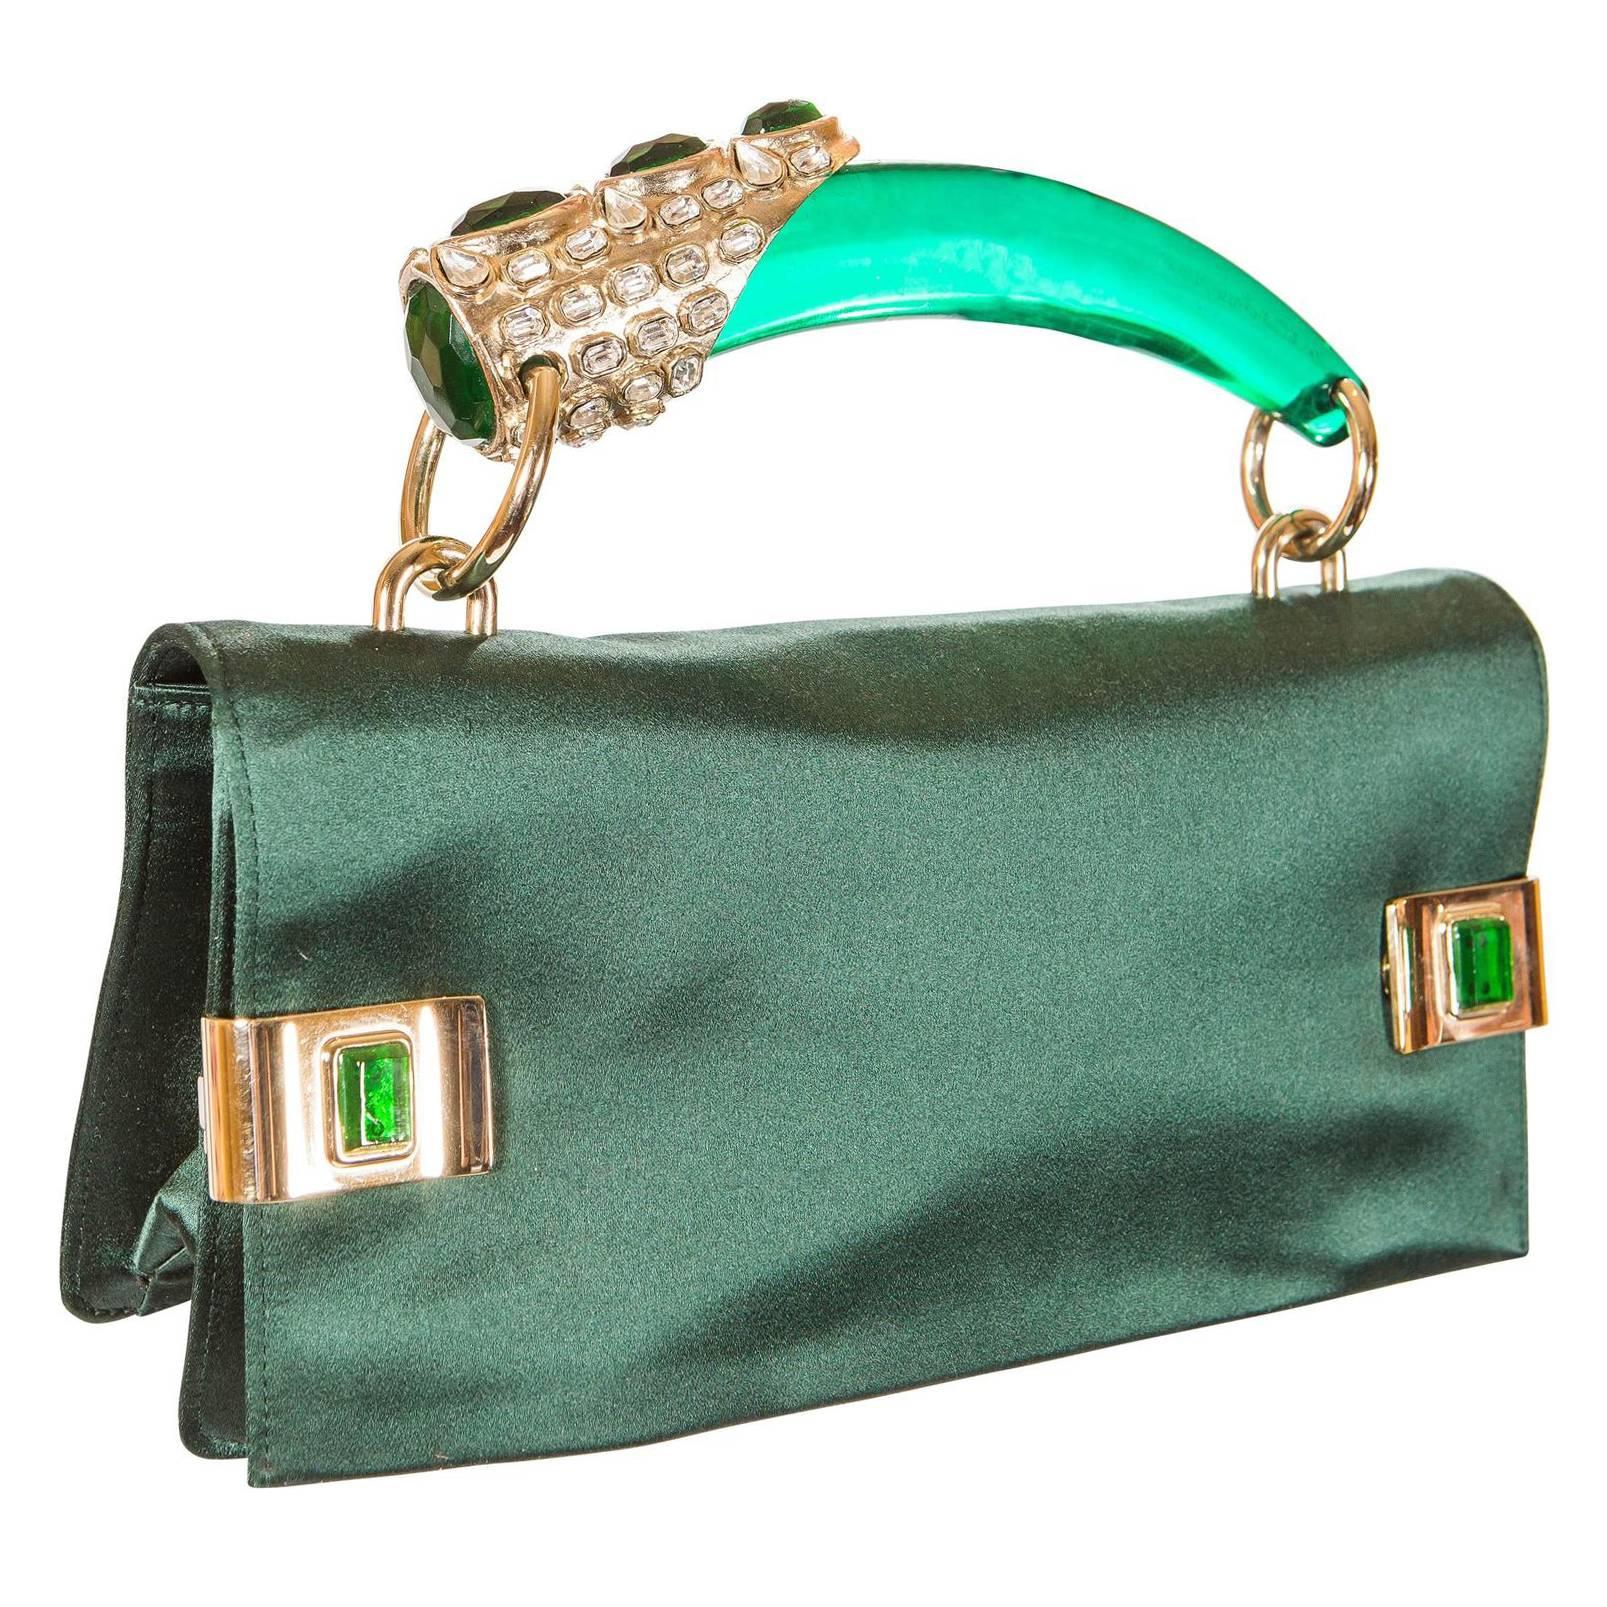 Prototype - Tom Ford for Yves Saint Laurent Spring 2004 Emerald Jeweled Bag